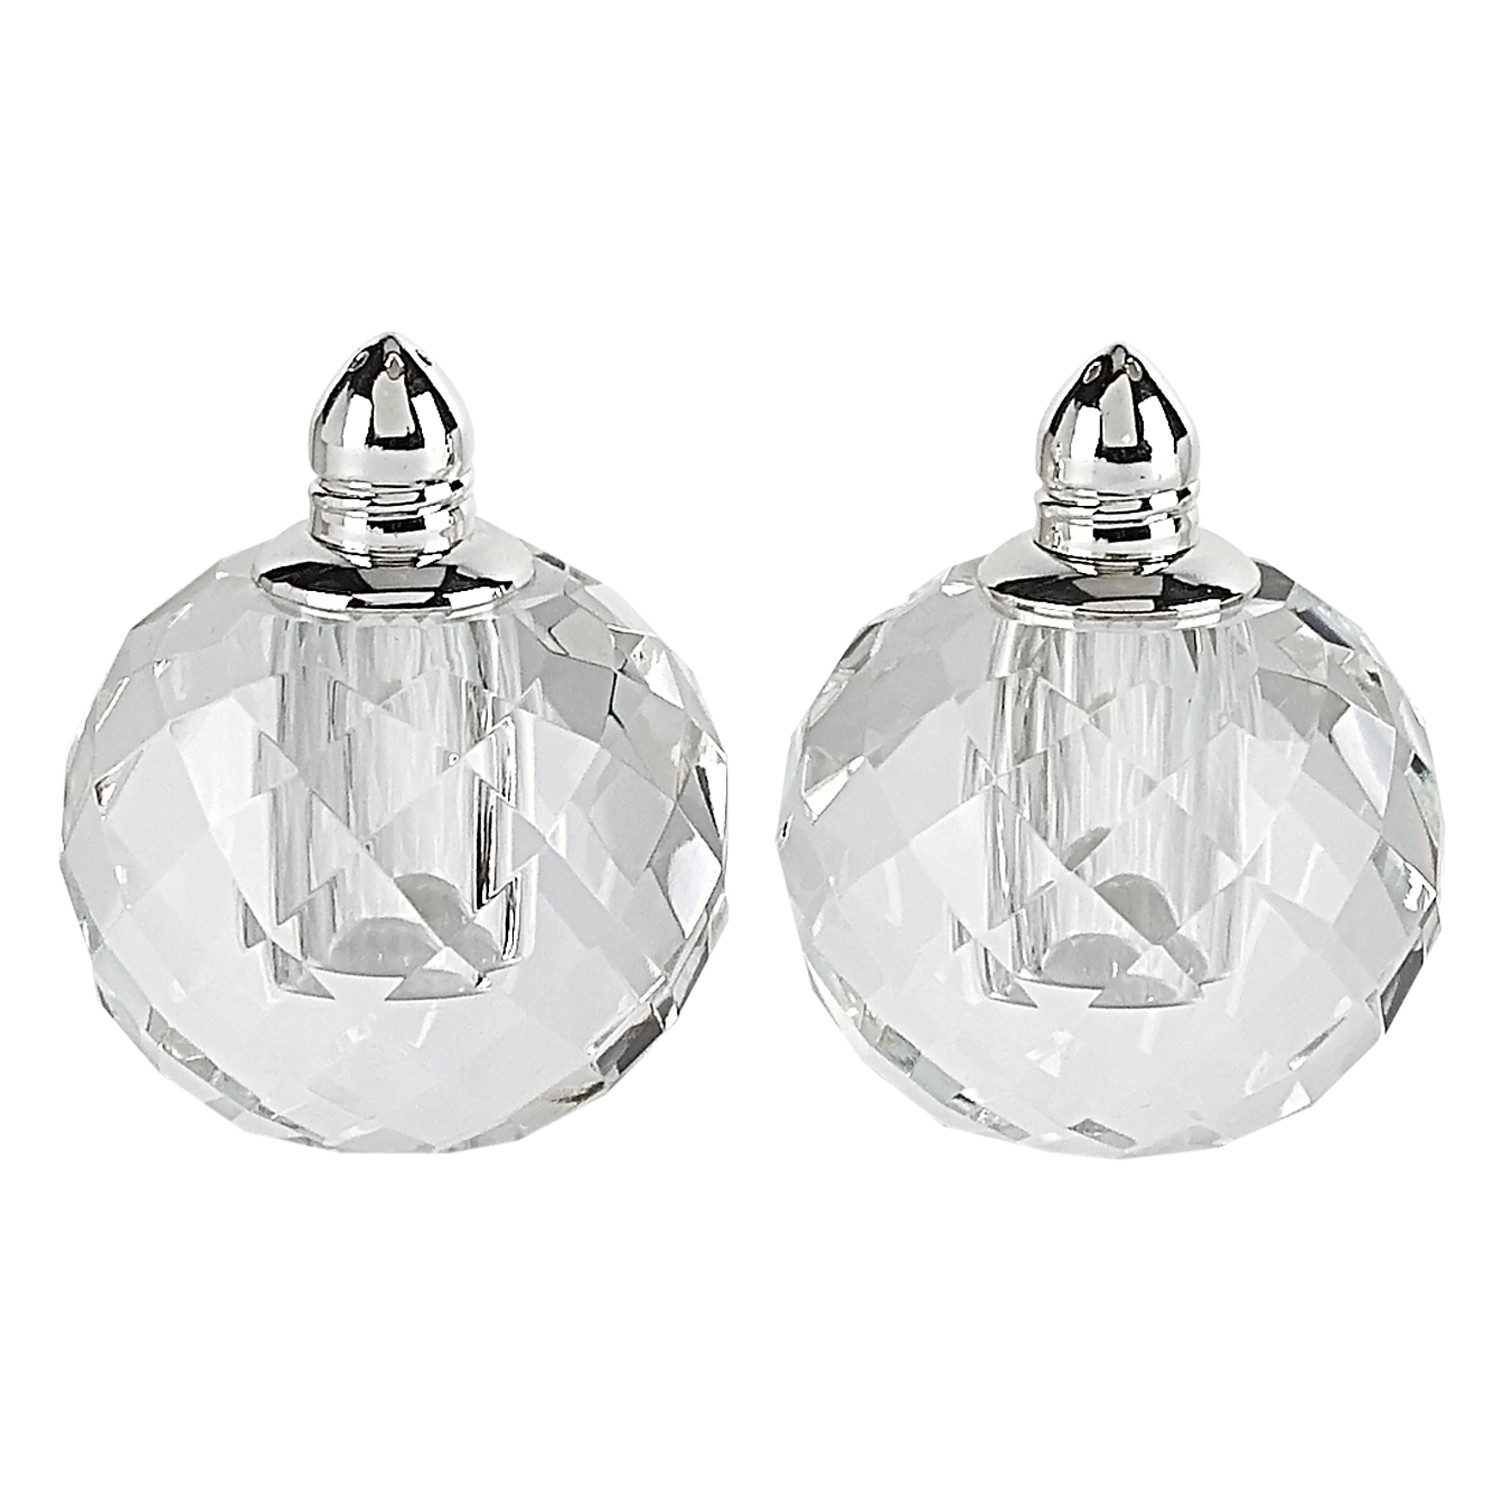 Handcrafted Optical Crystal and Silver Rounded Salt & Pepper Shakers